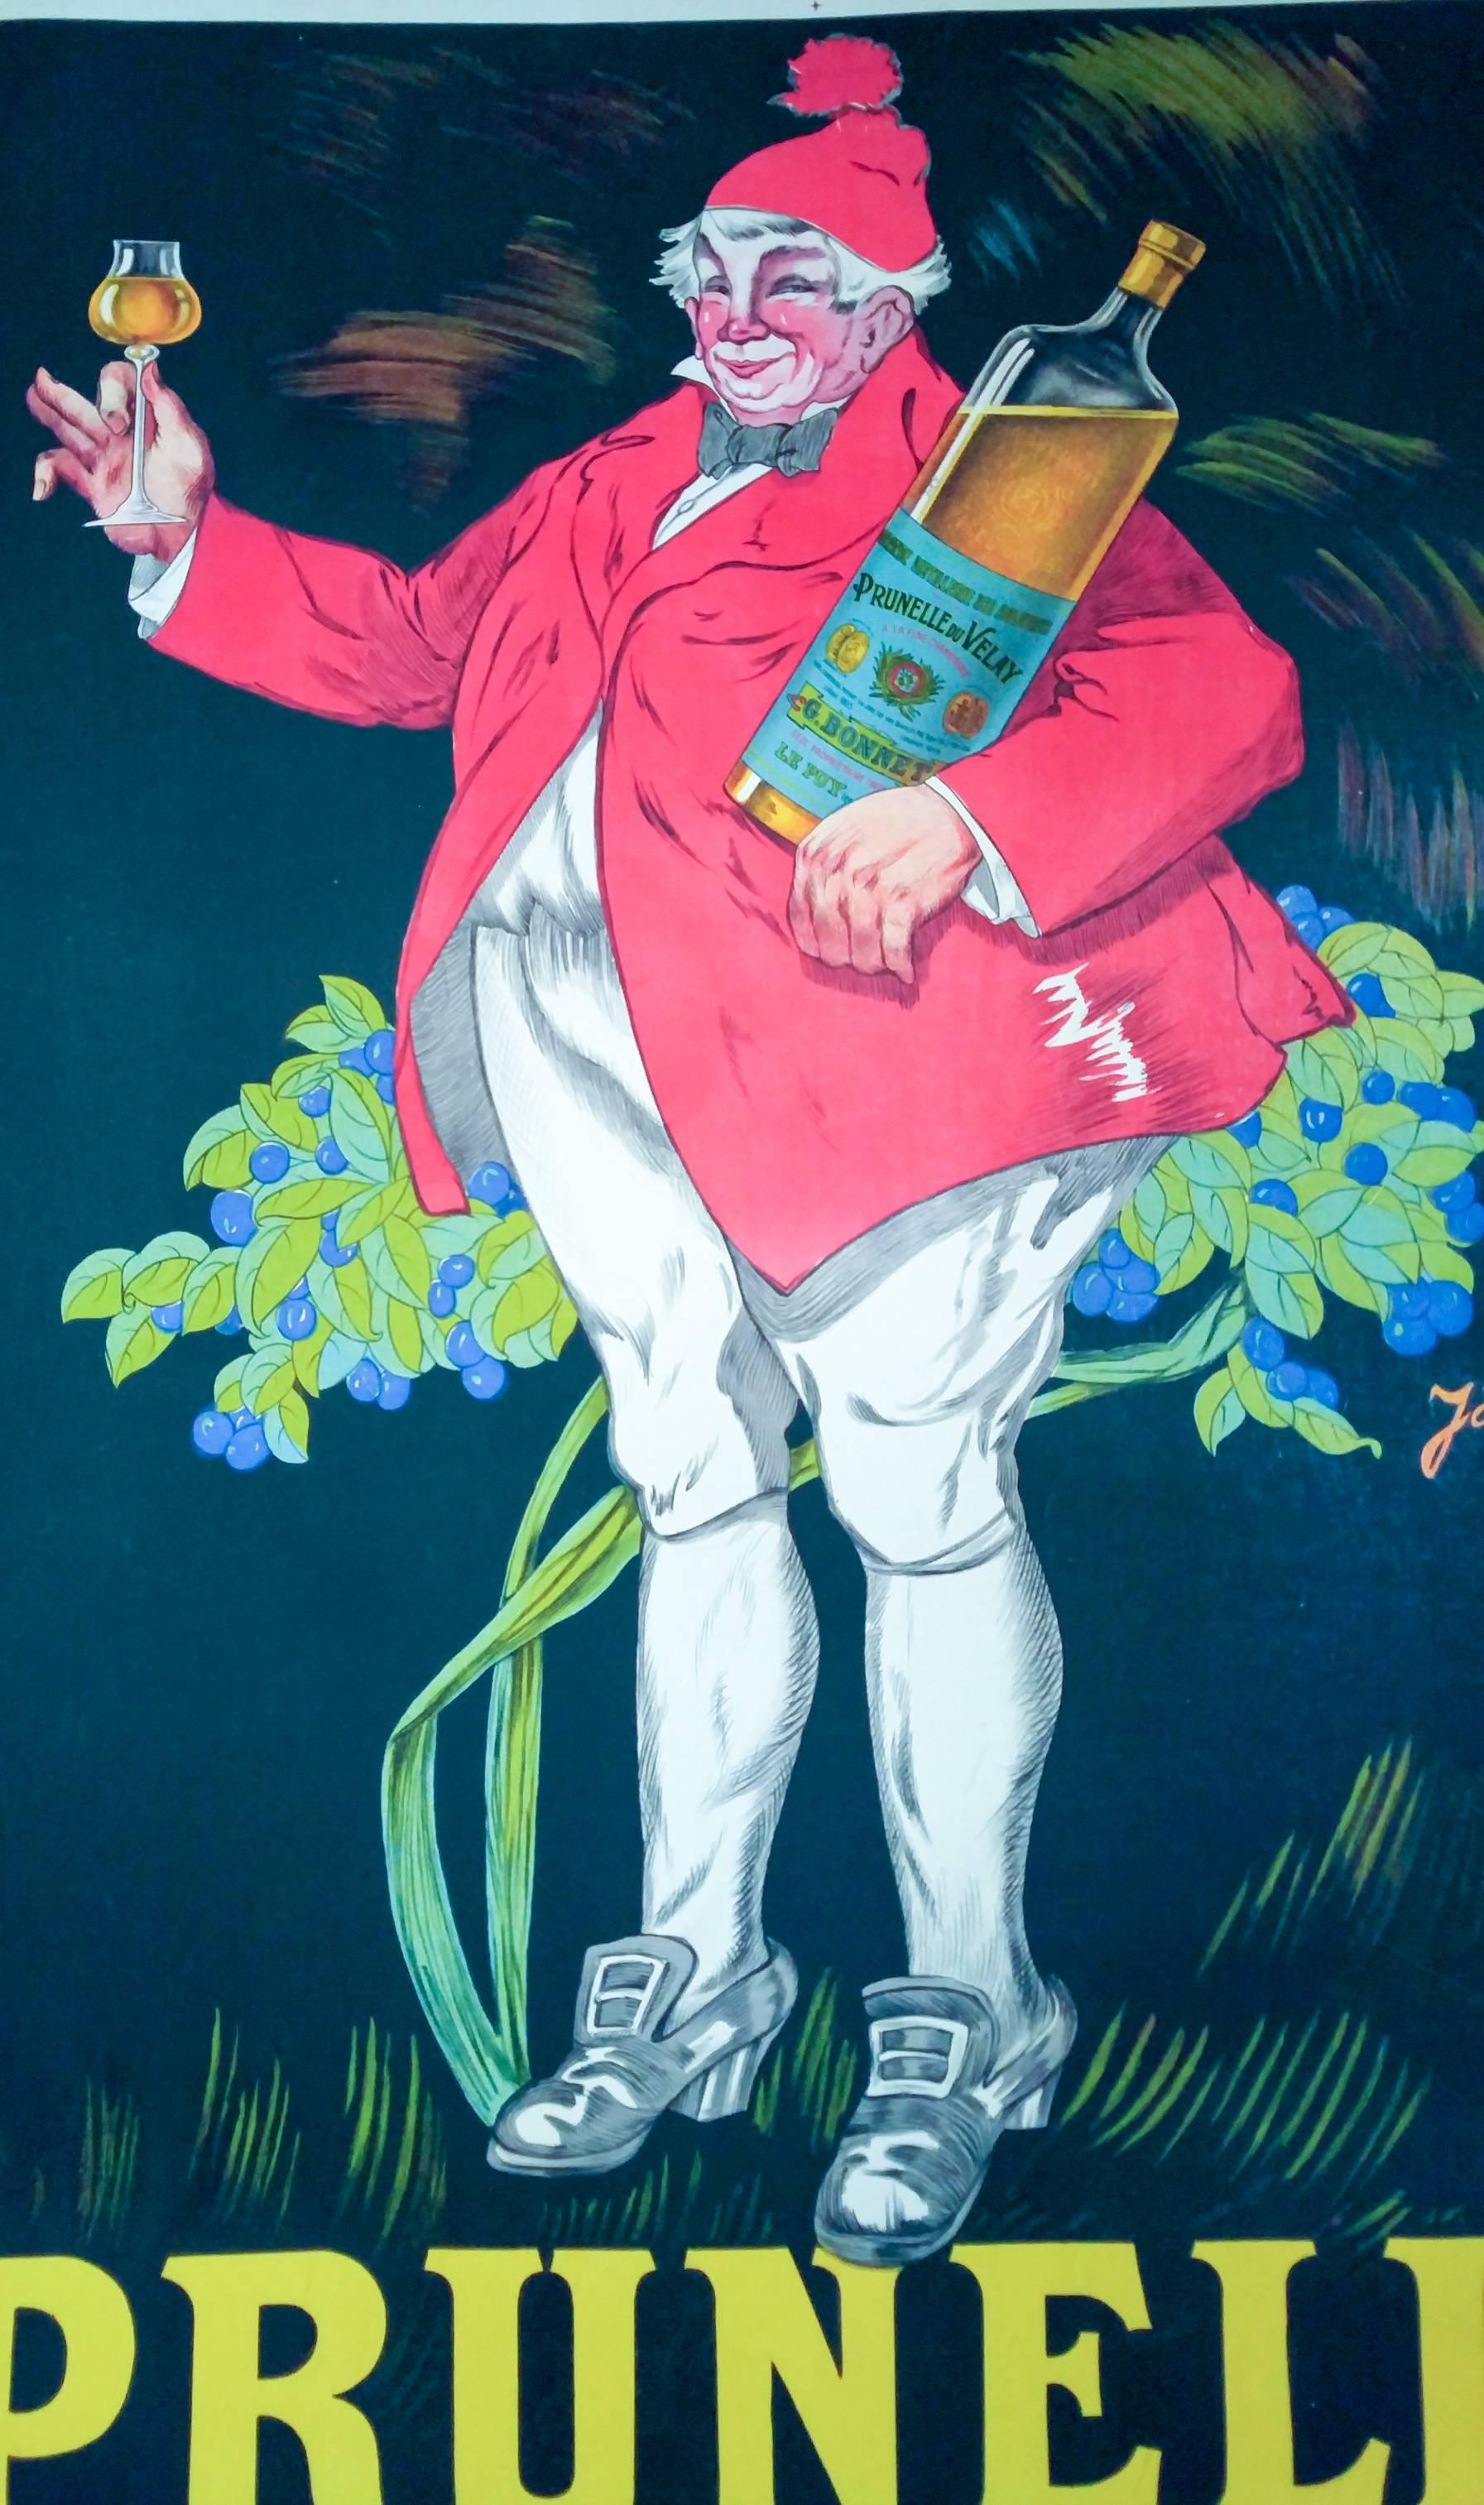 Original very large size unframed vintage advertising poster created in 1922 in France by artist Henri Jarville depicting a country gentleman enjoying Prunelle liqueur. The bold artwork and Fine attention to detail combine to captivate the viewers